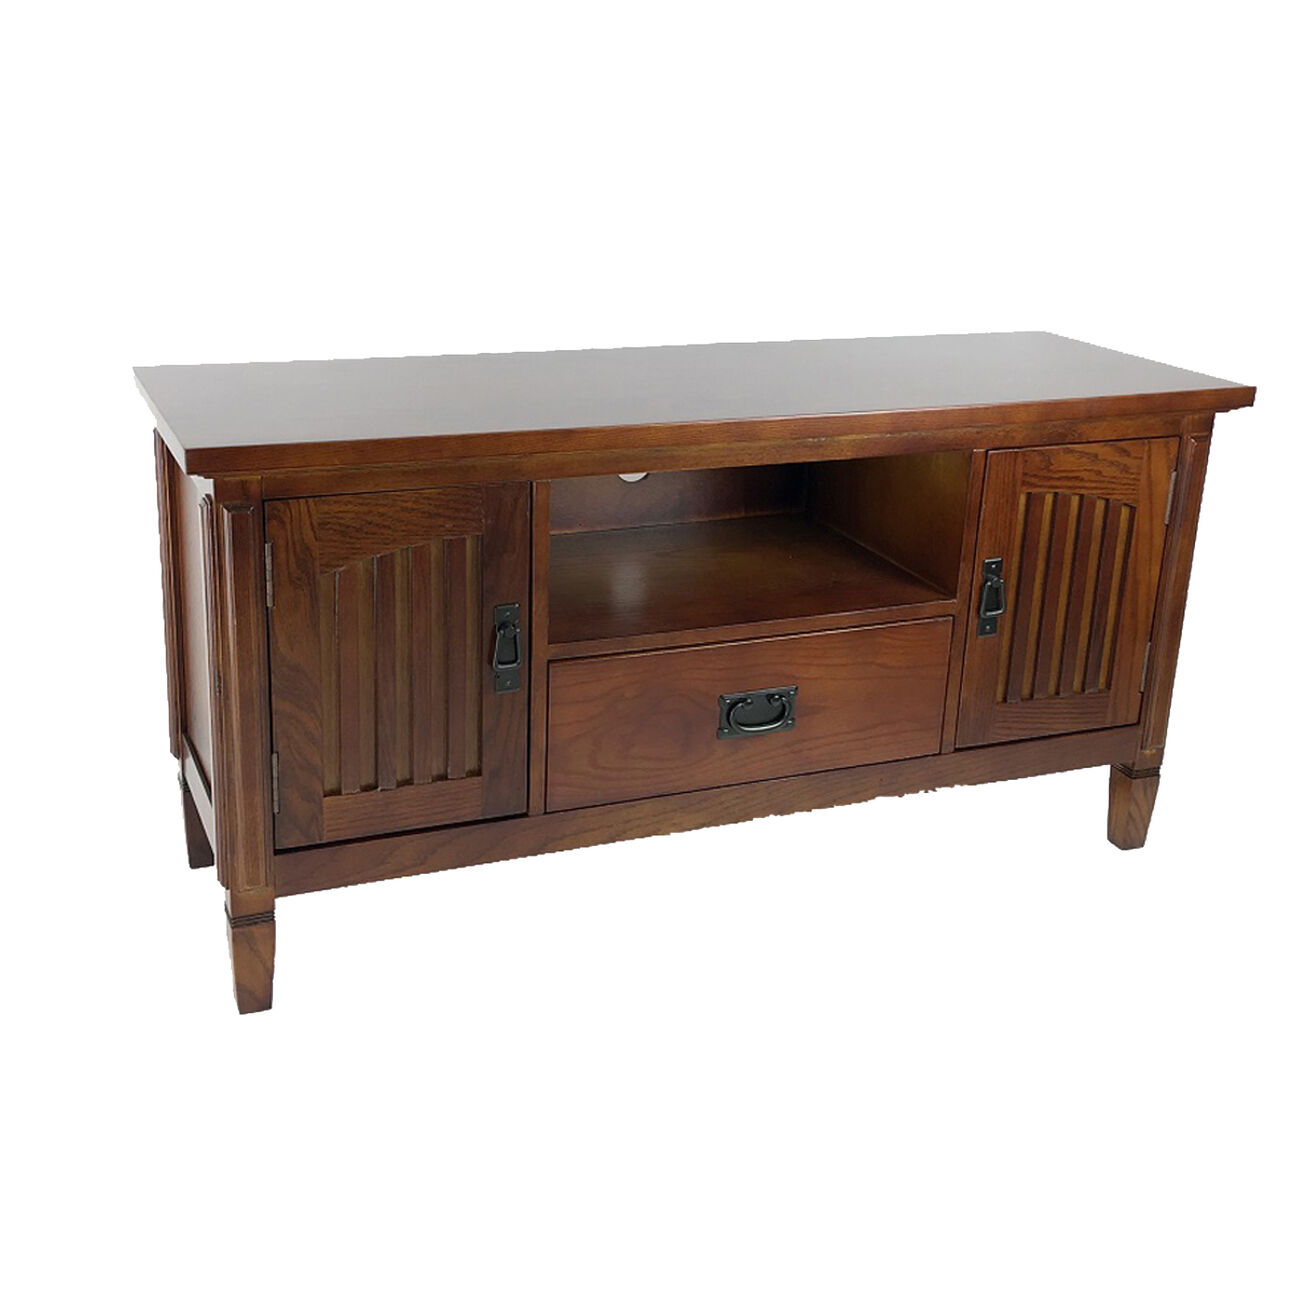 Wooden TV Stand with 2 Door Cabinets and 1 Open Shelf, Brown